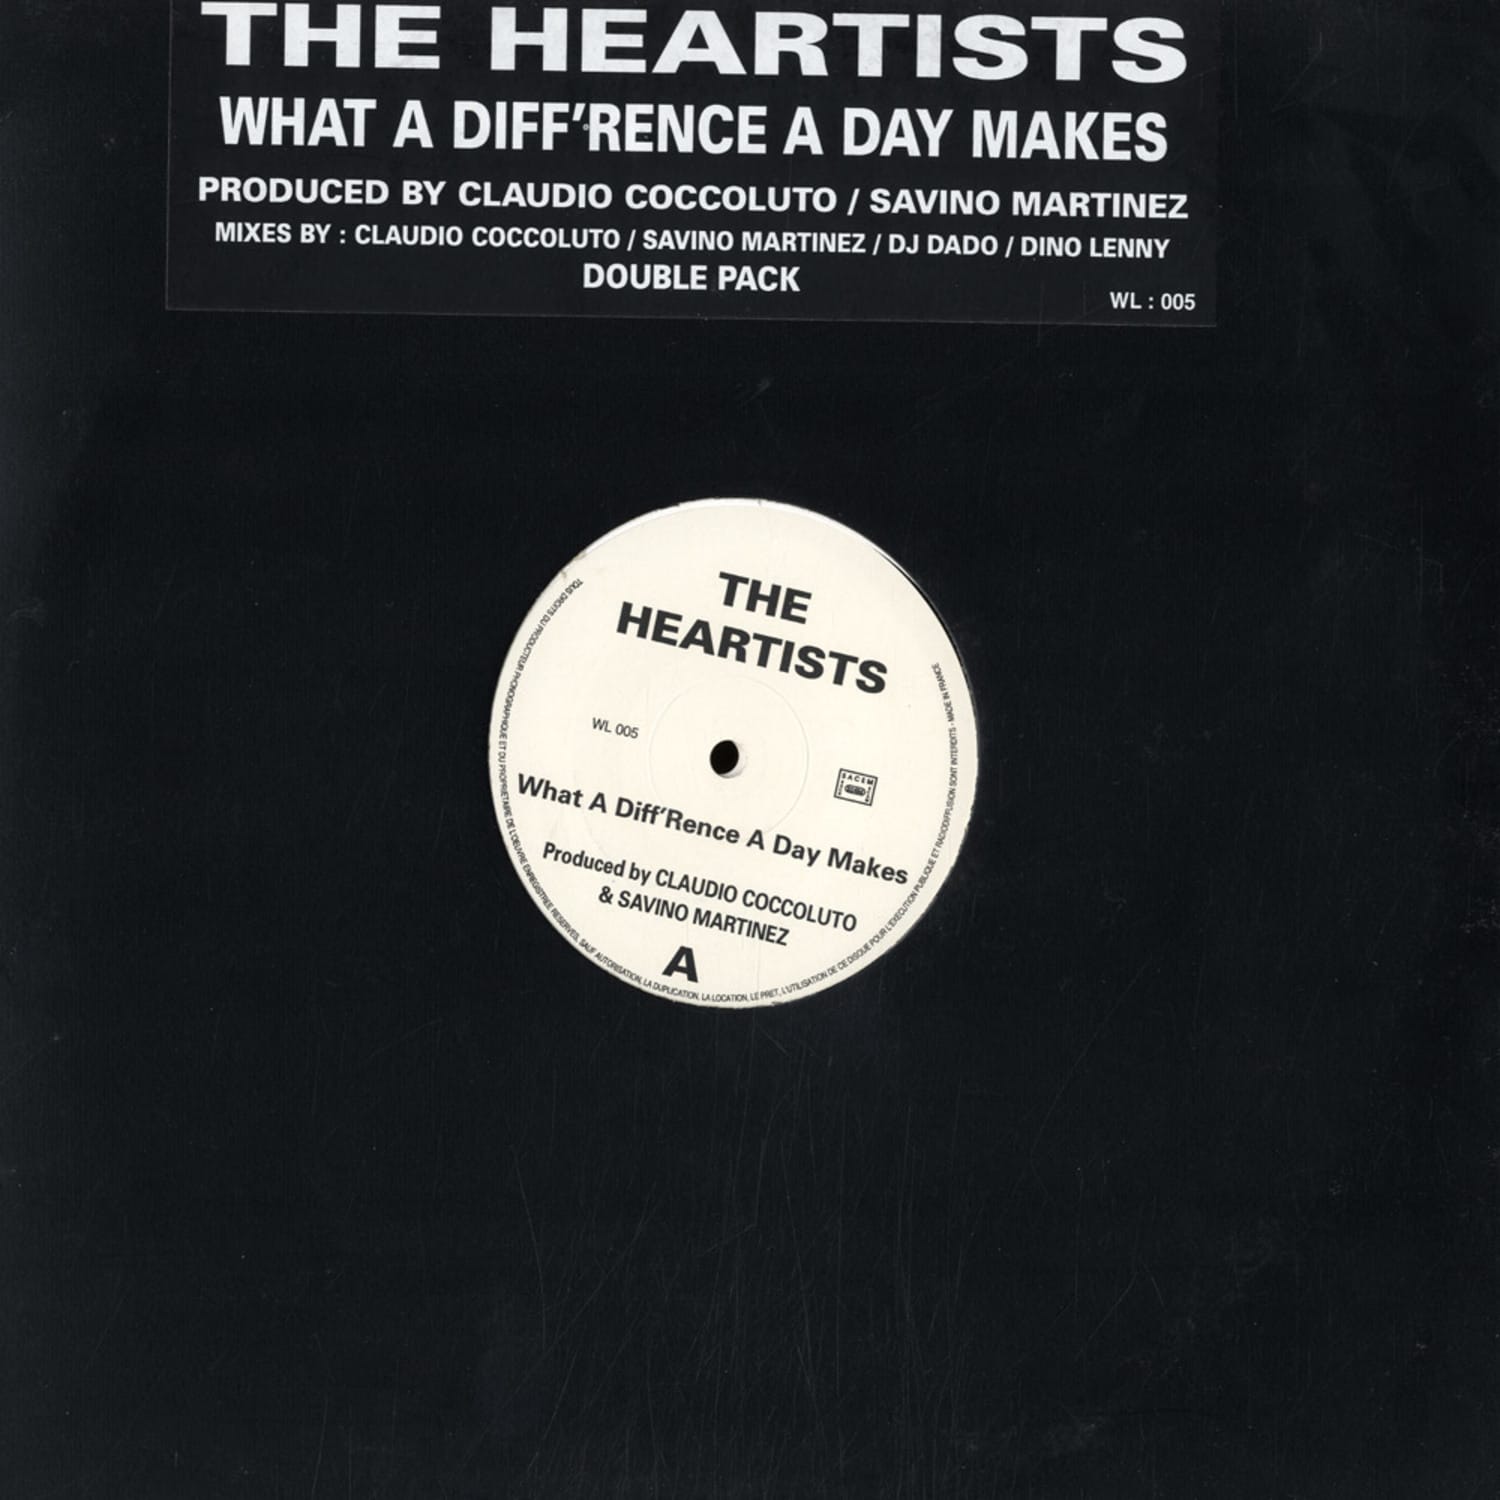 The Heartists - WHAT A DIFF RENCE A DAY MAKES / 2X12INCH